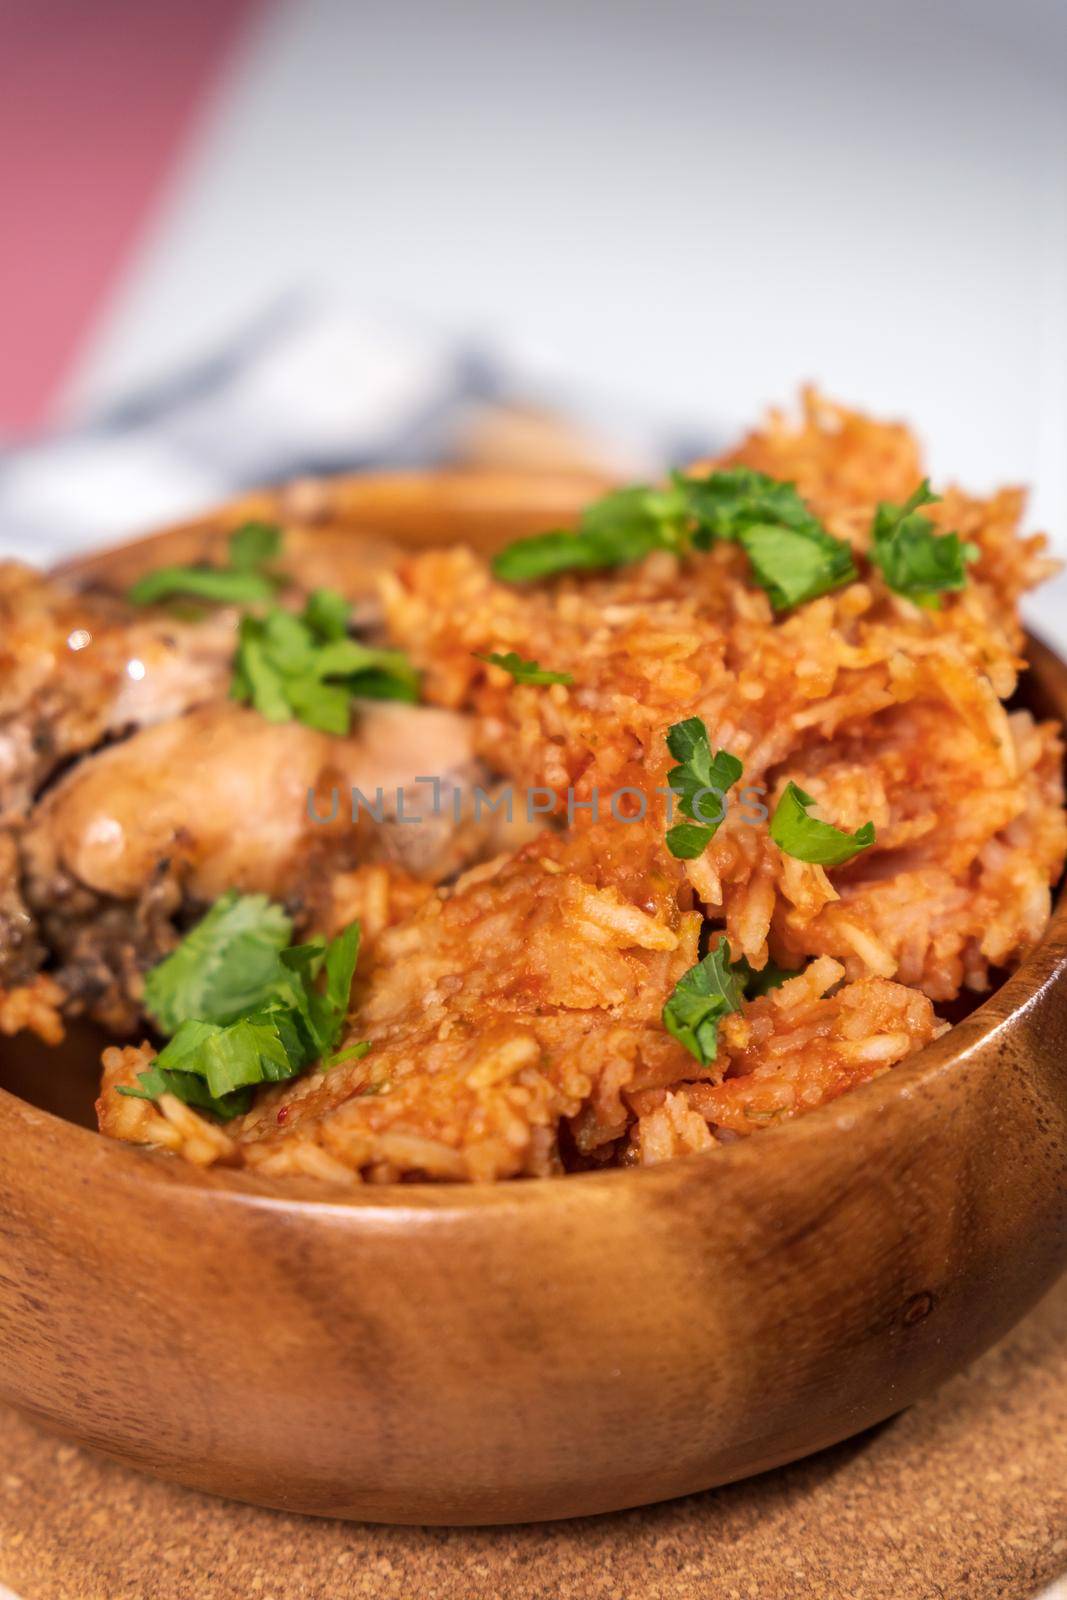 Bowl of east African Jollof Rice garnished with pieces of roasted chicken. Vertical photo by darksoul72